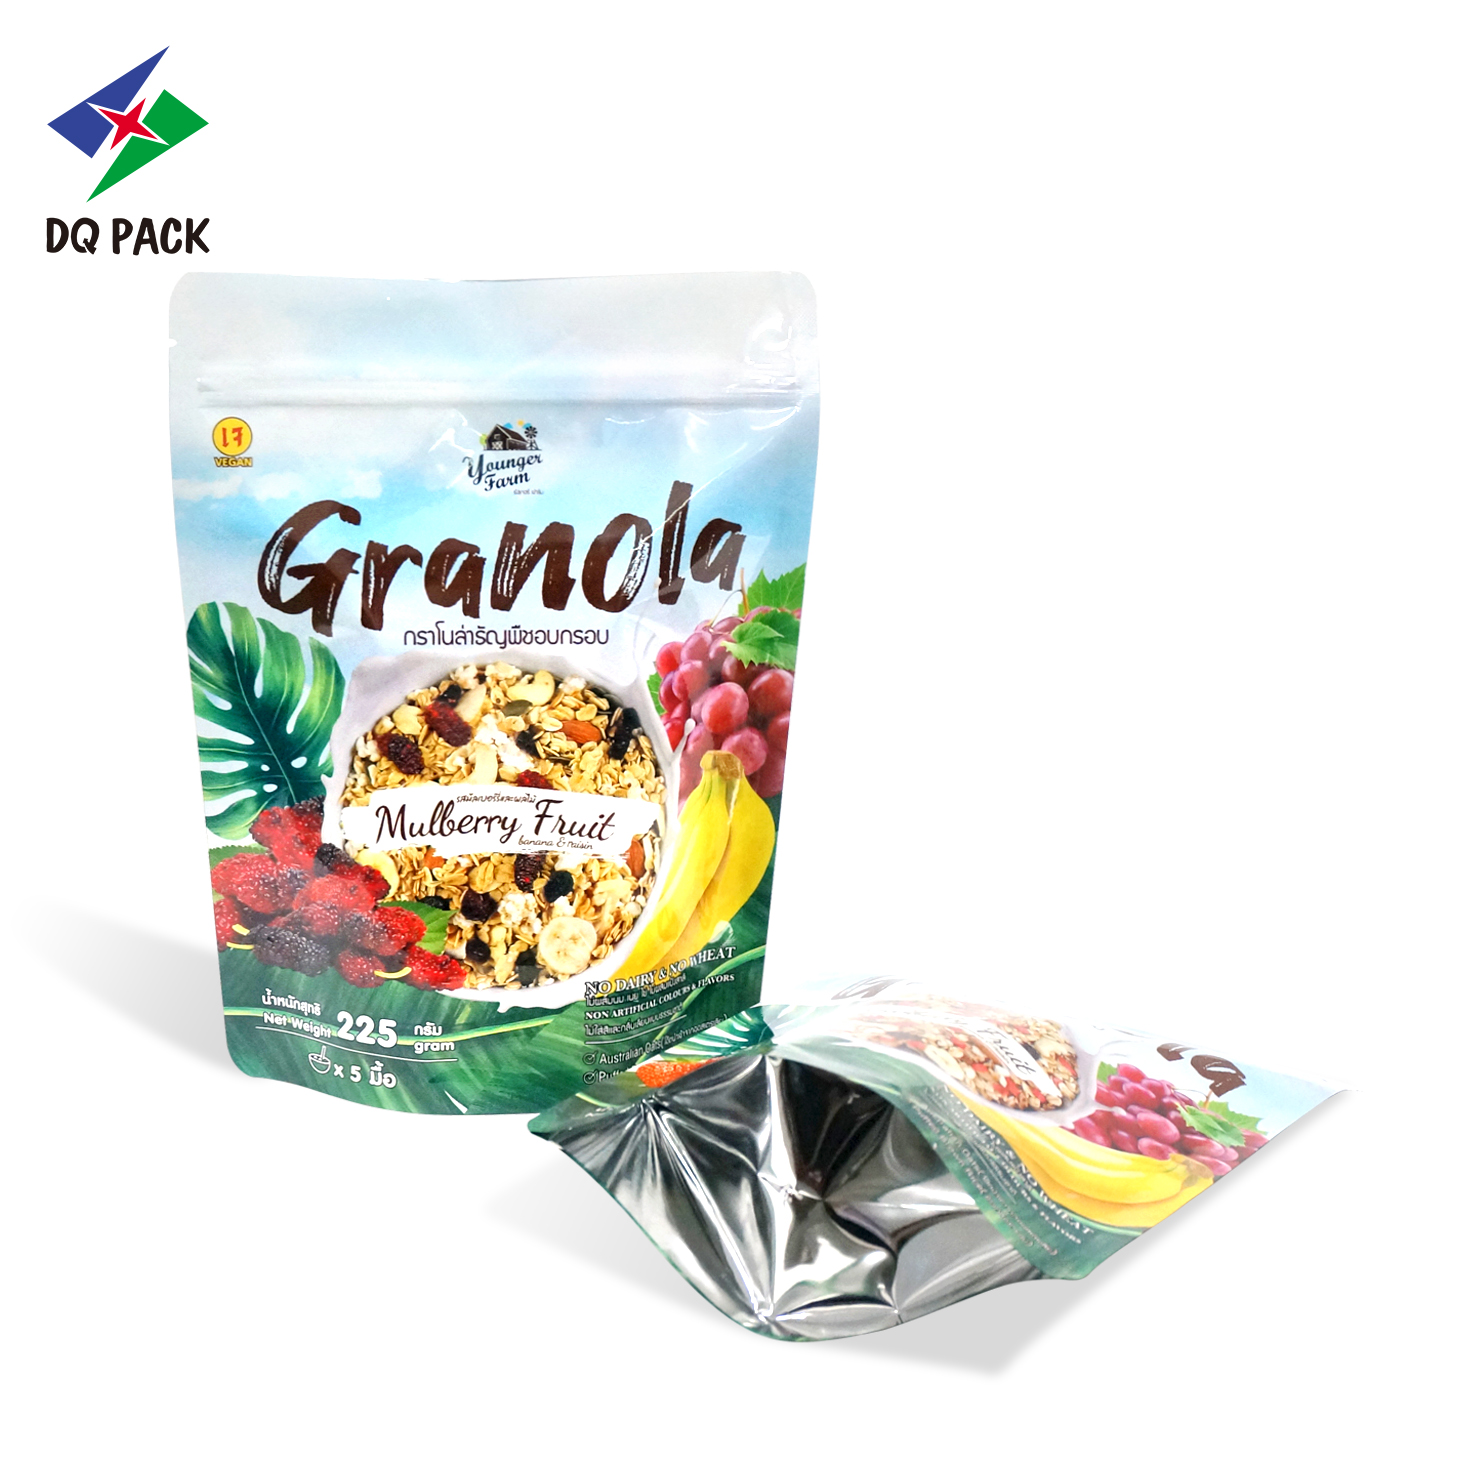 DQ PACK granola mulberry fruit oats packaging bag with resealale zipper